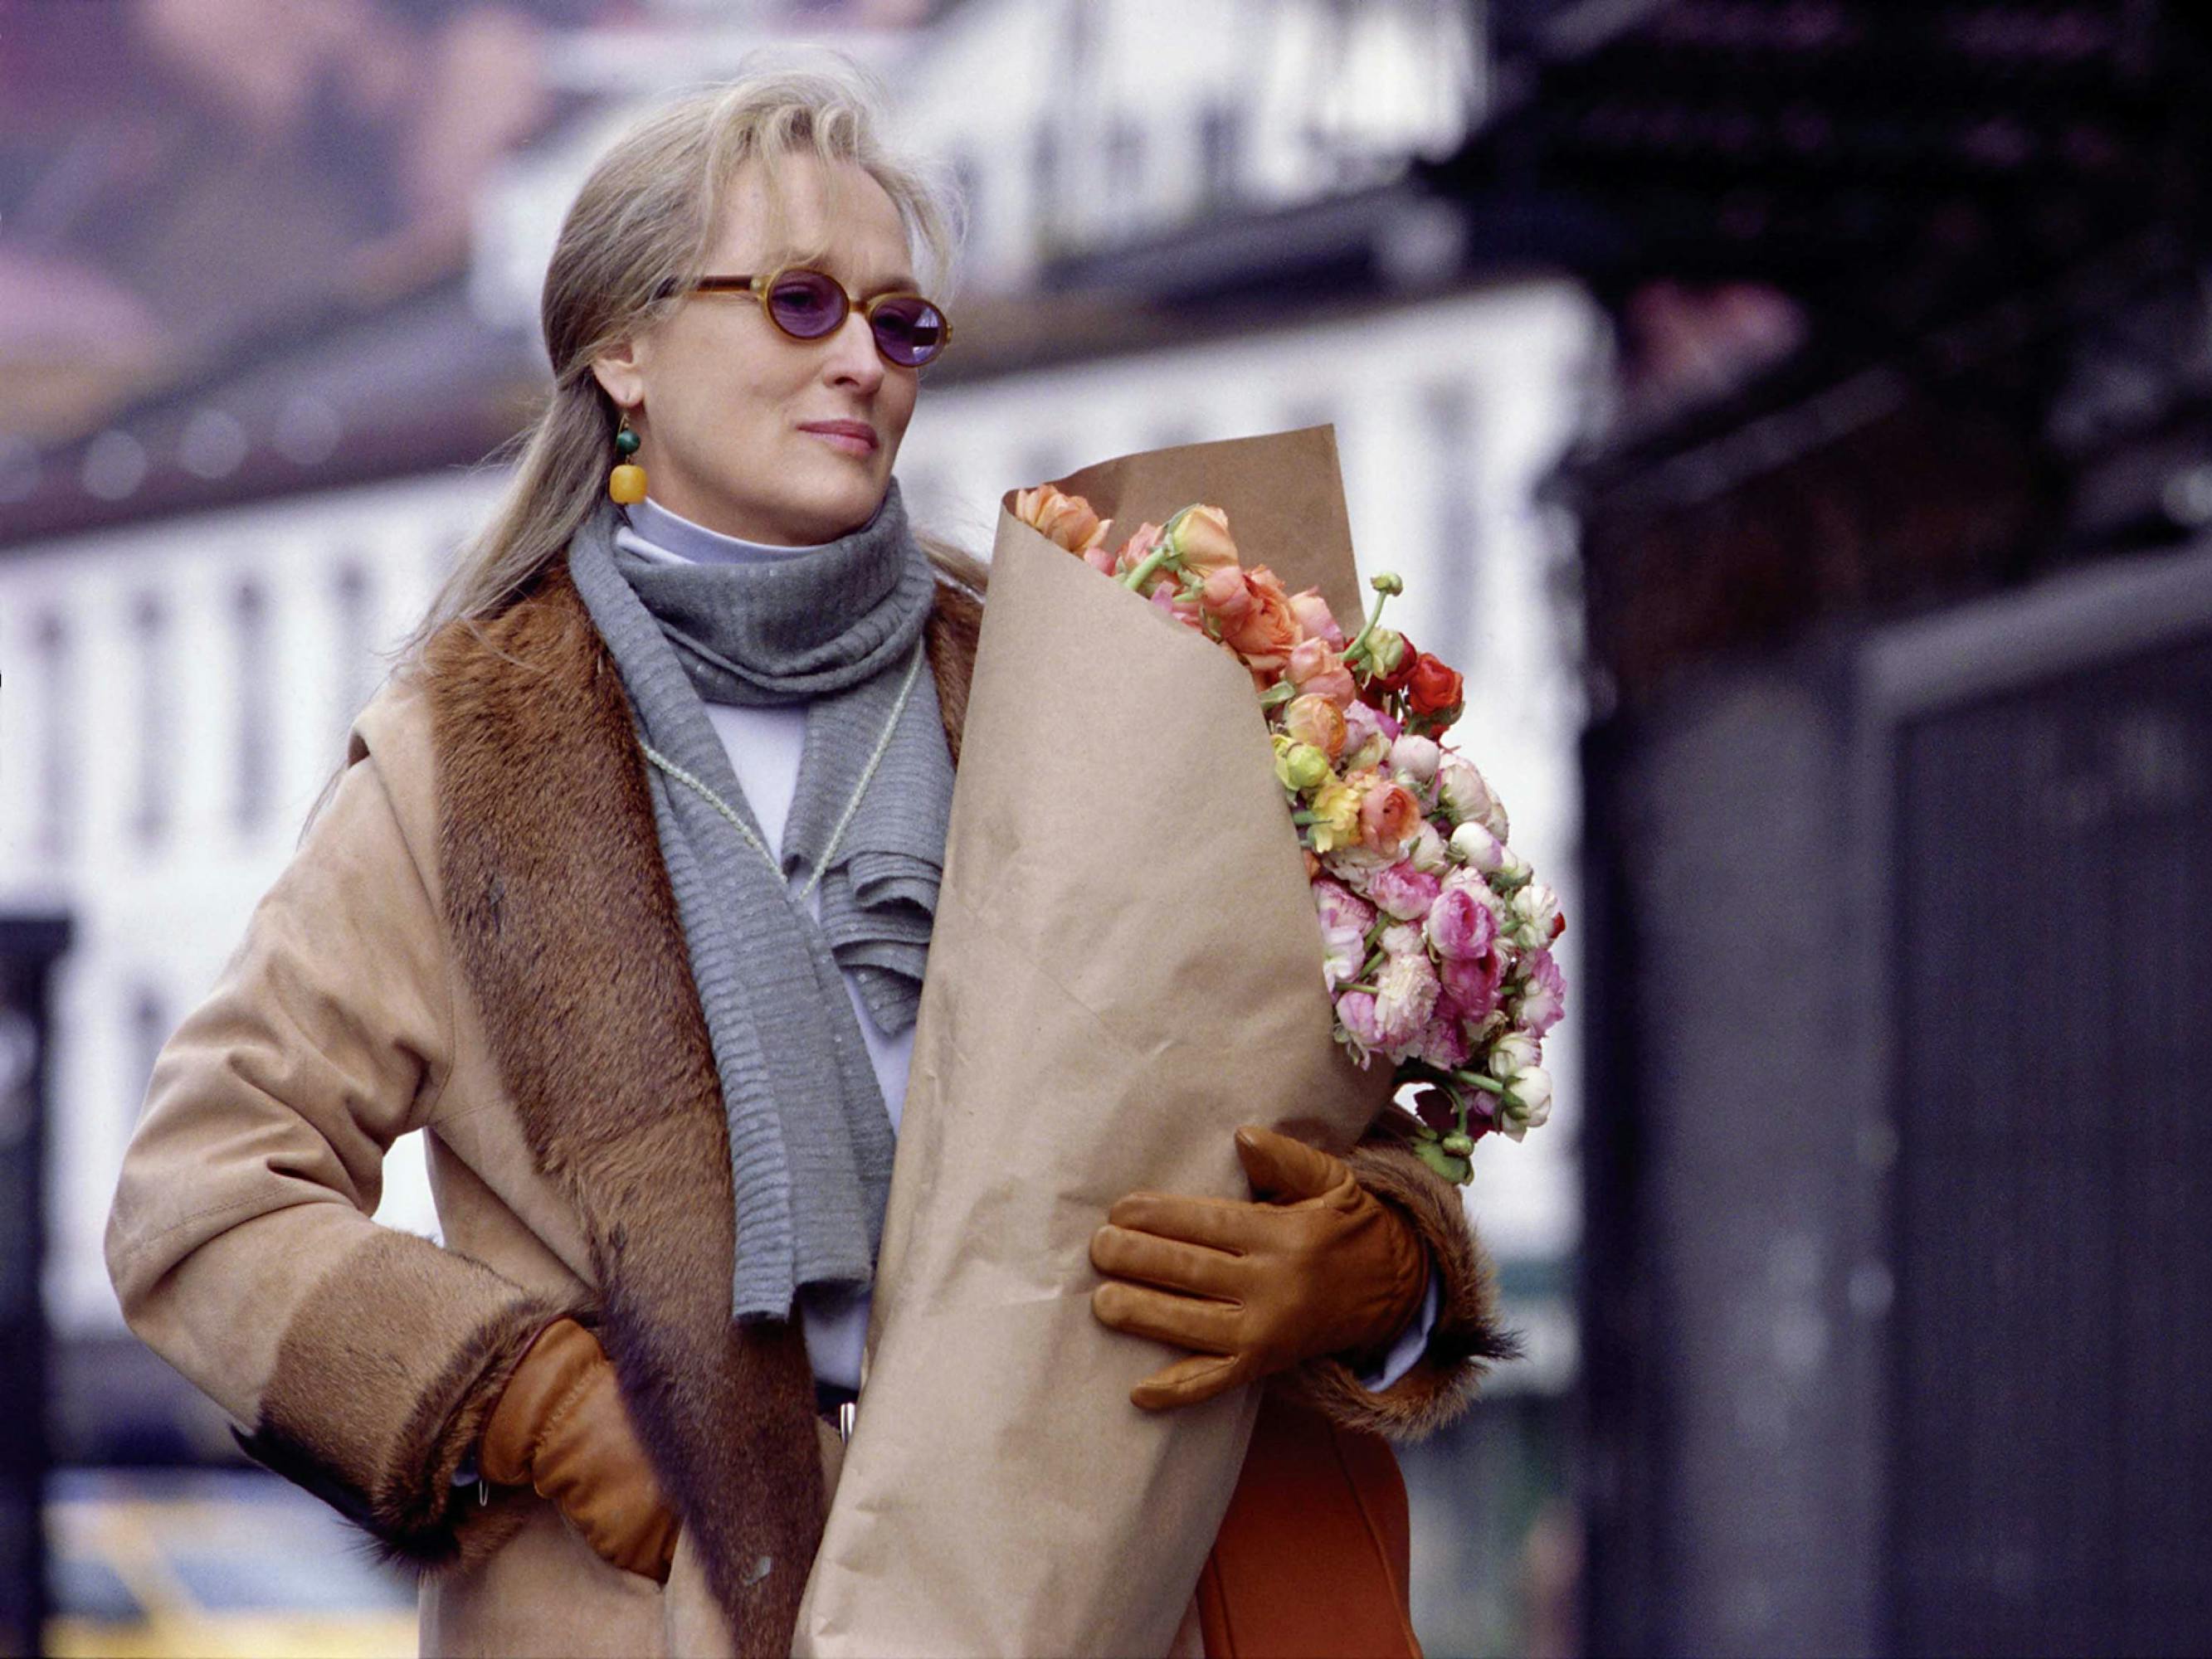 Meryl Streep carries a large bouquet of flowers wrapped in brown paper. She wears sunglasses, a blue scarf, and a tan jacket with a fur collar. 